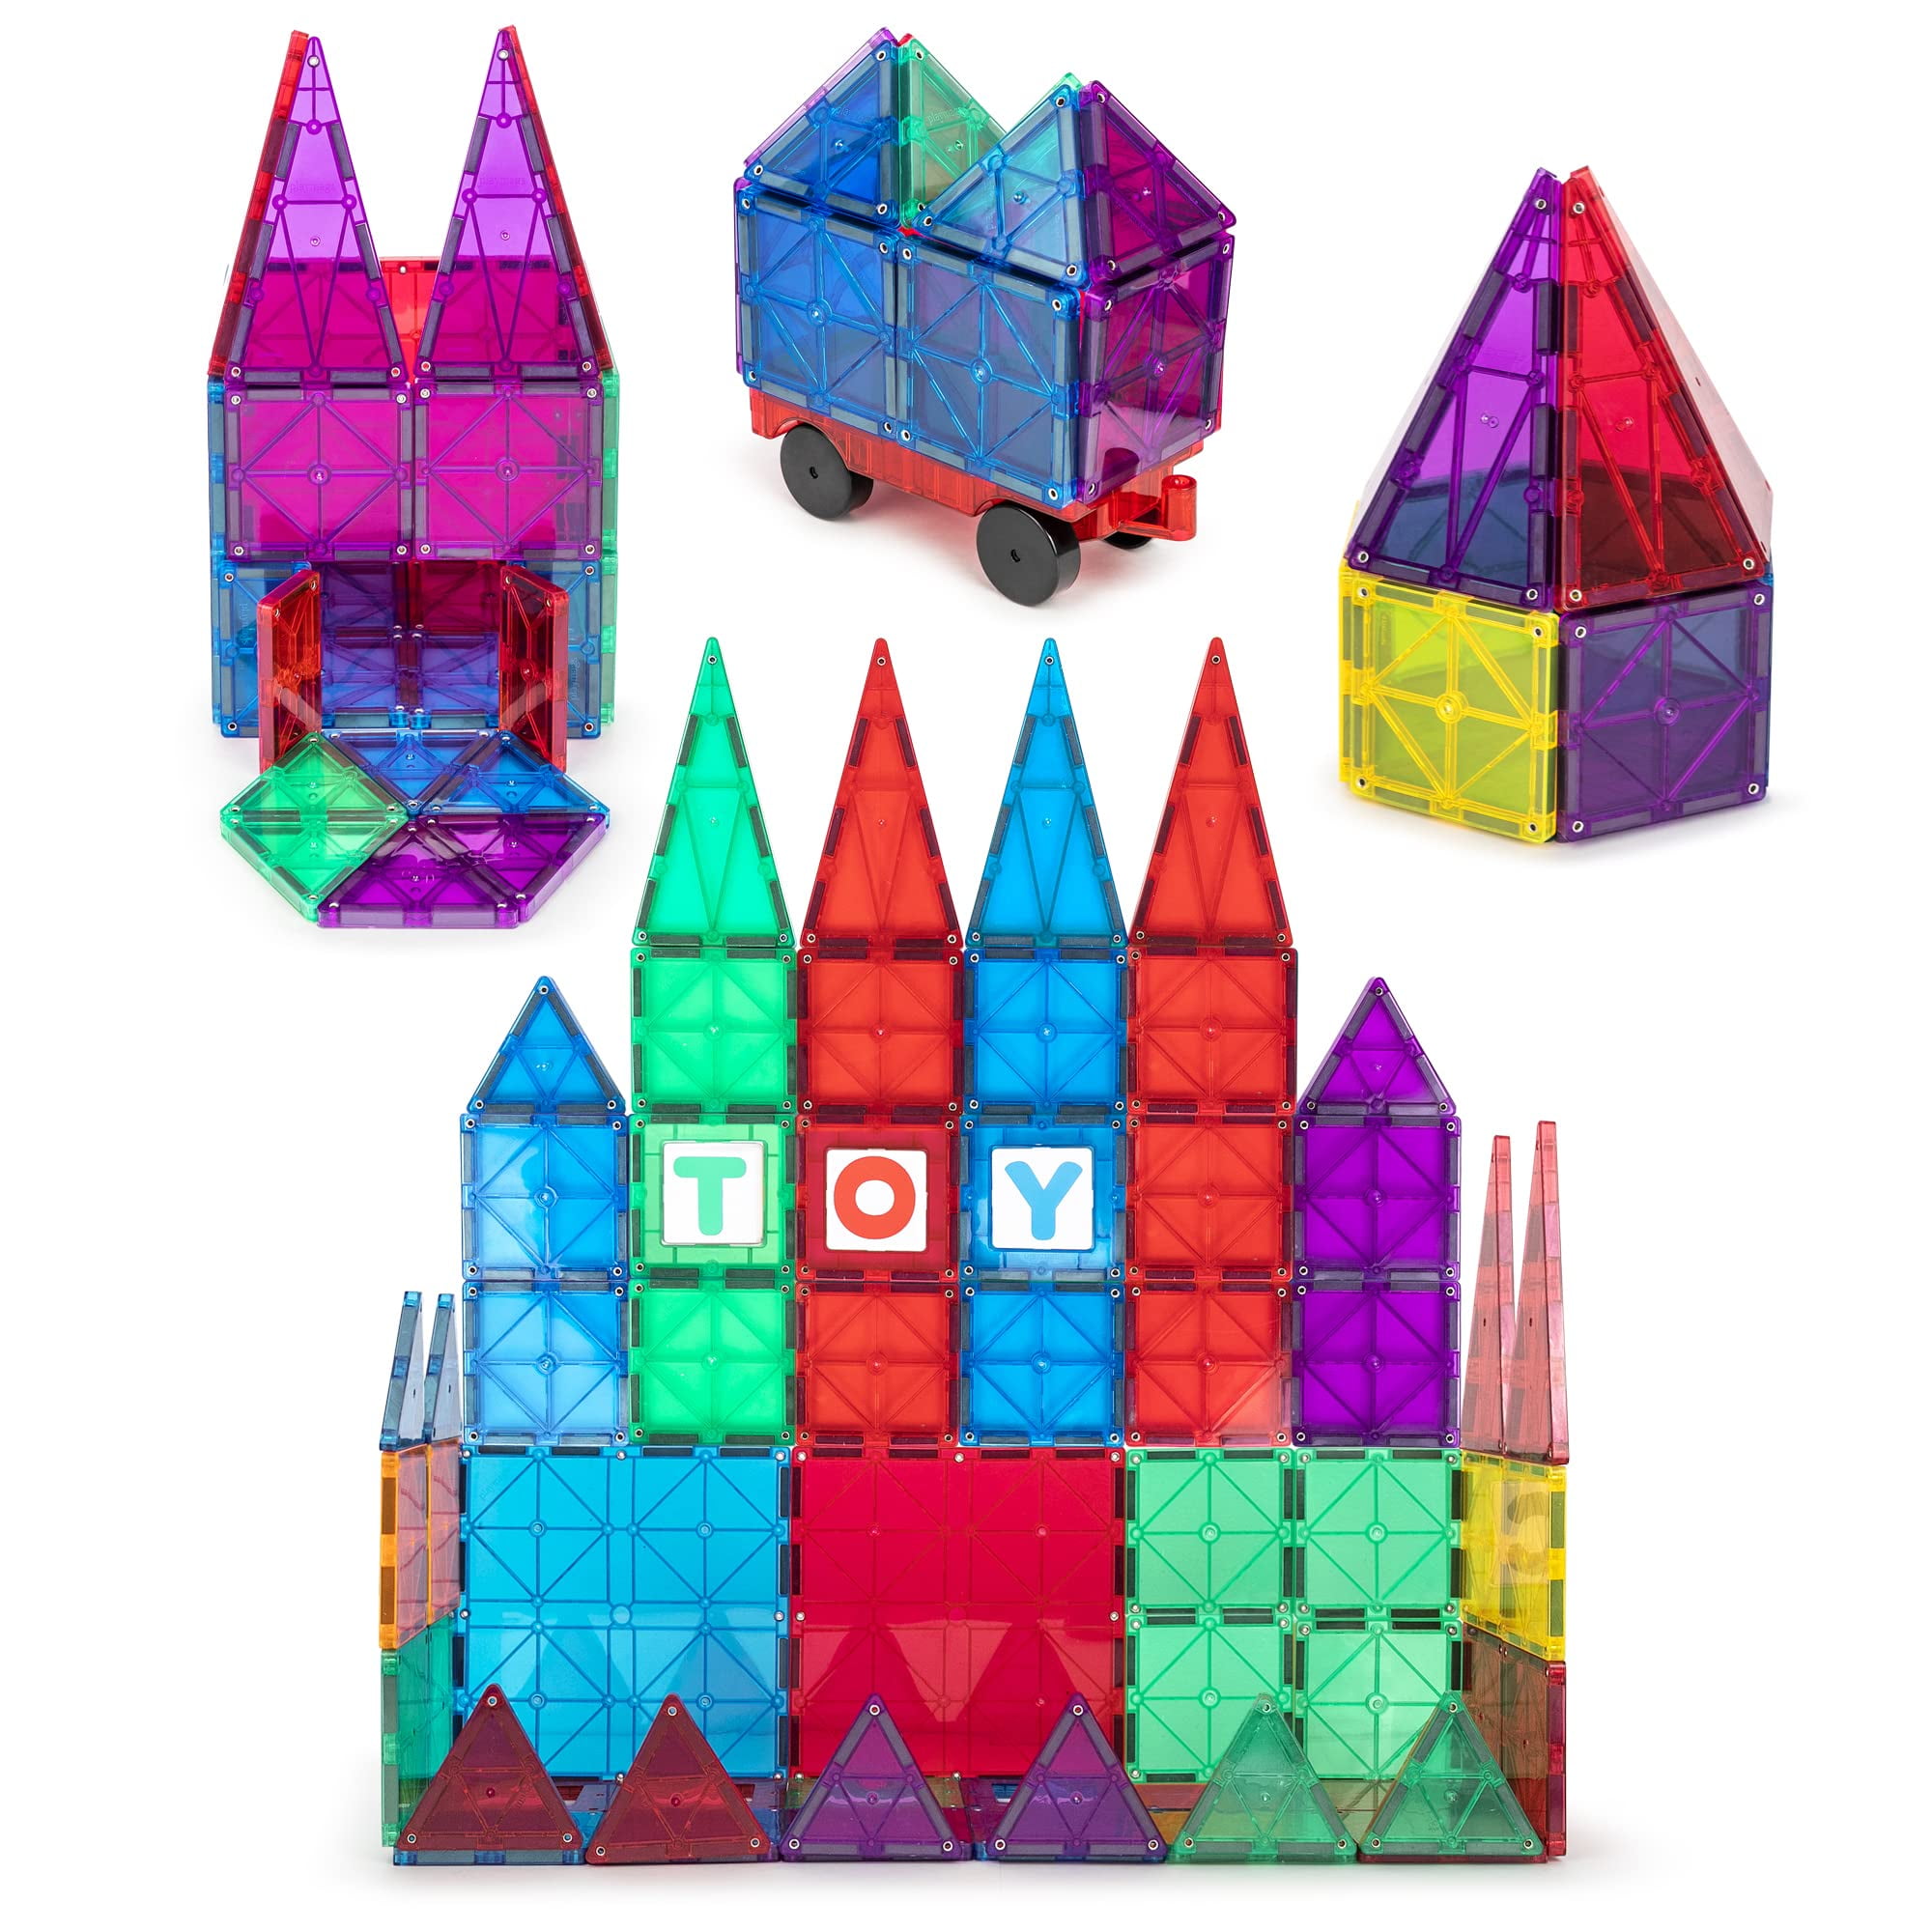 90 Piece Magnetic Tiles magnetic Building Blocks Toys for Kids Square+Triangle 